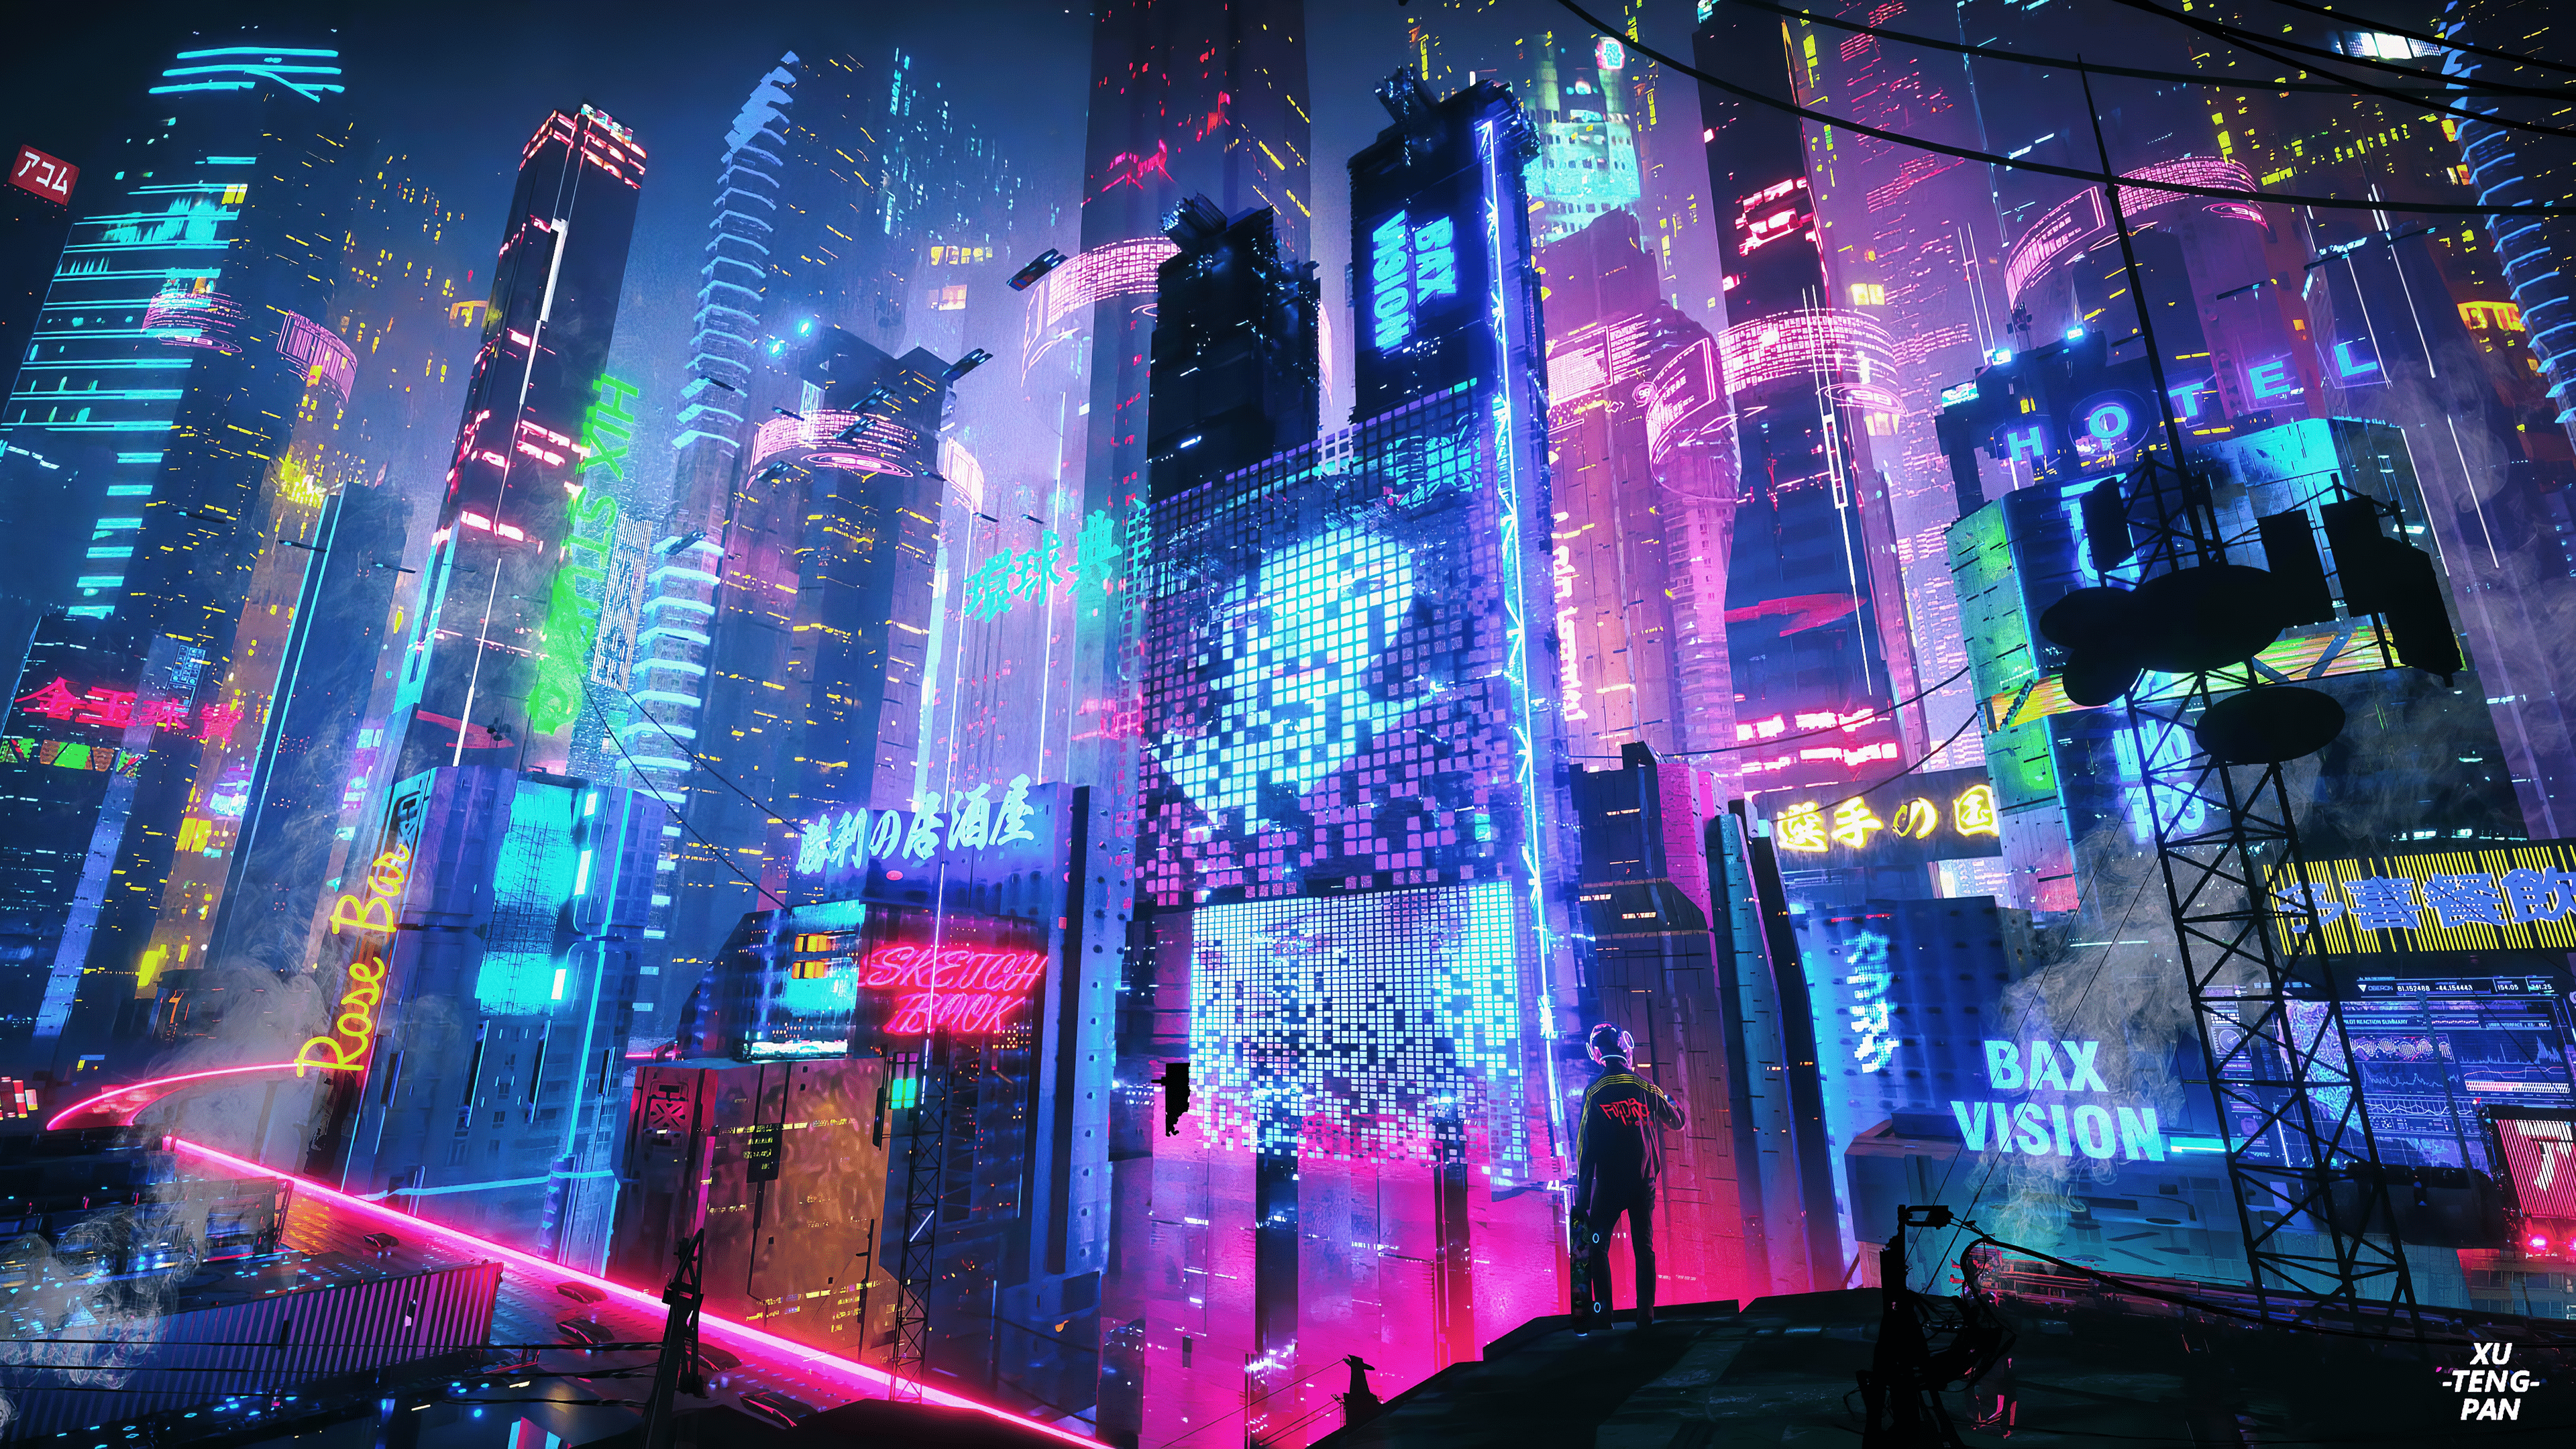 A Cyberpunk city at night with a person standing on a rooftop - 3840x2160, Cyberpunk